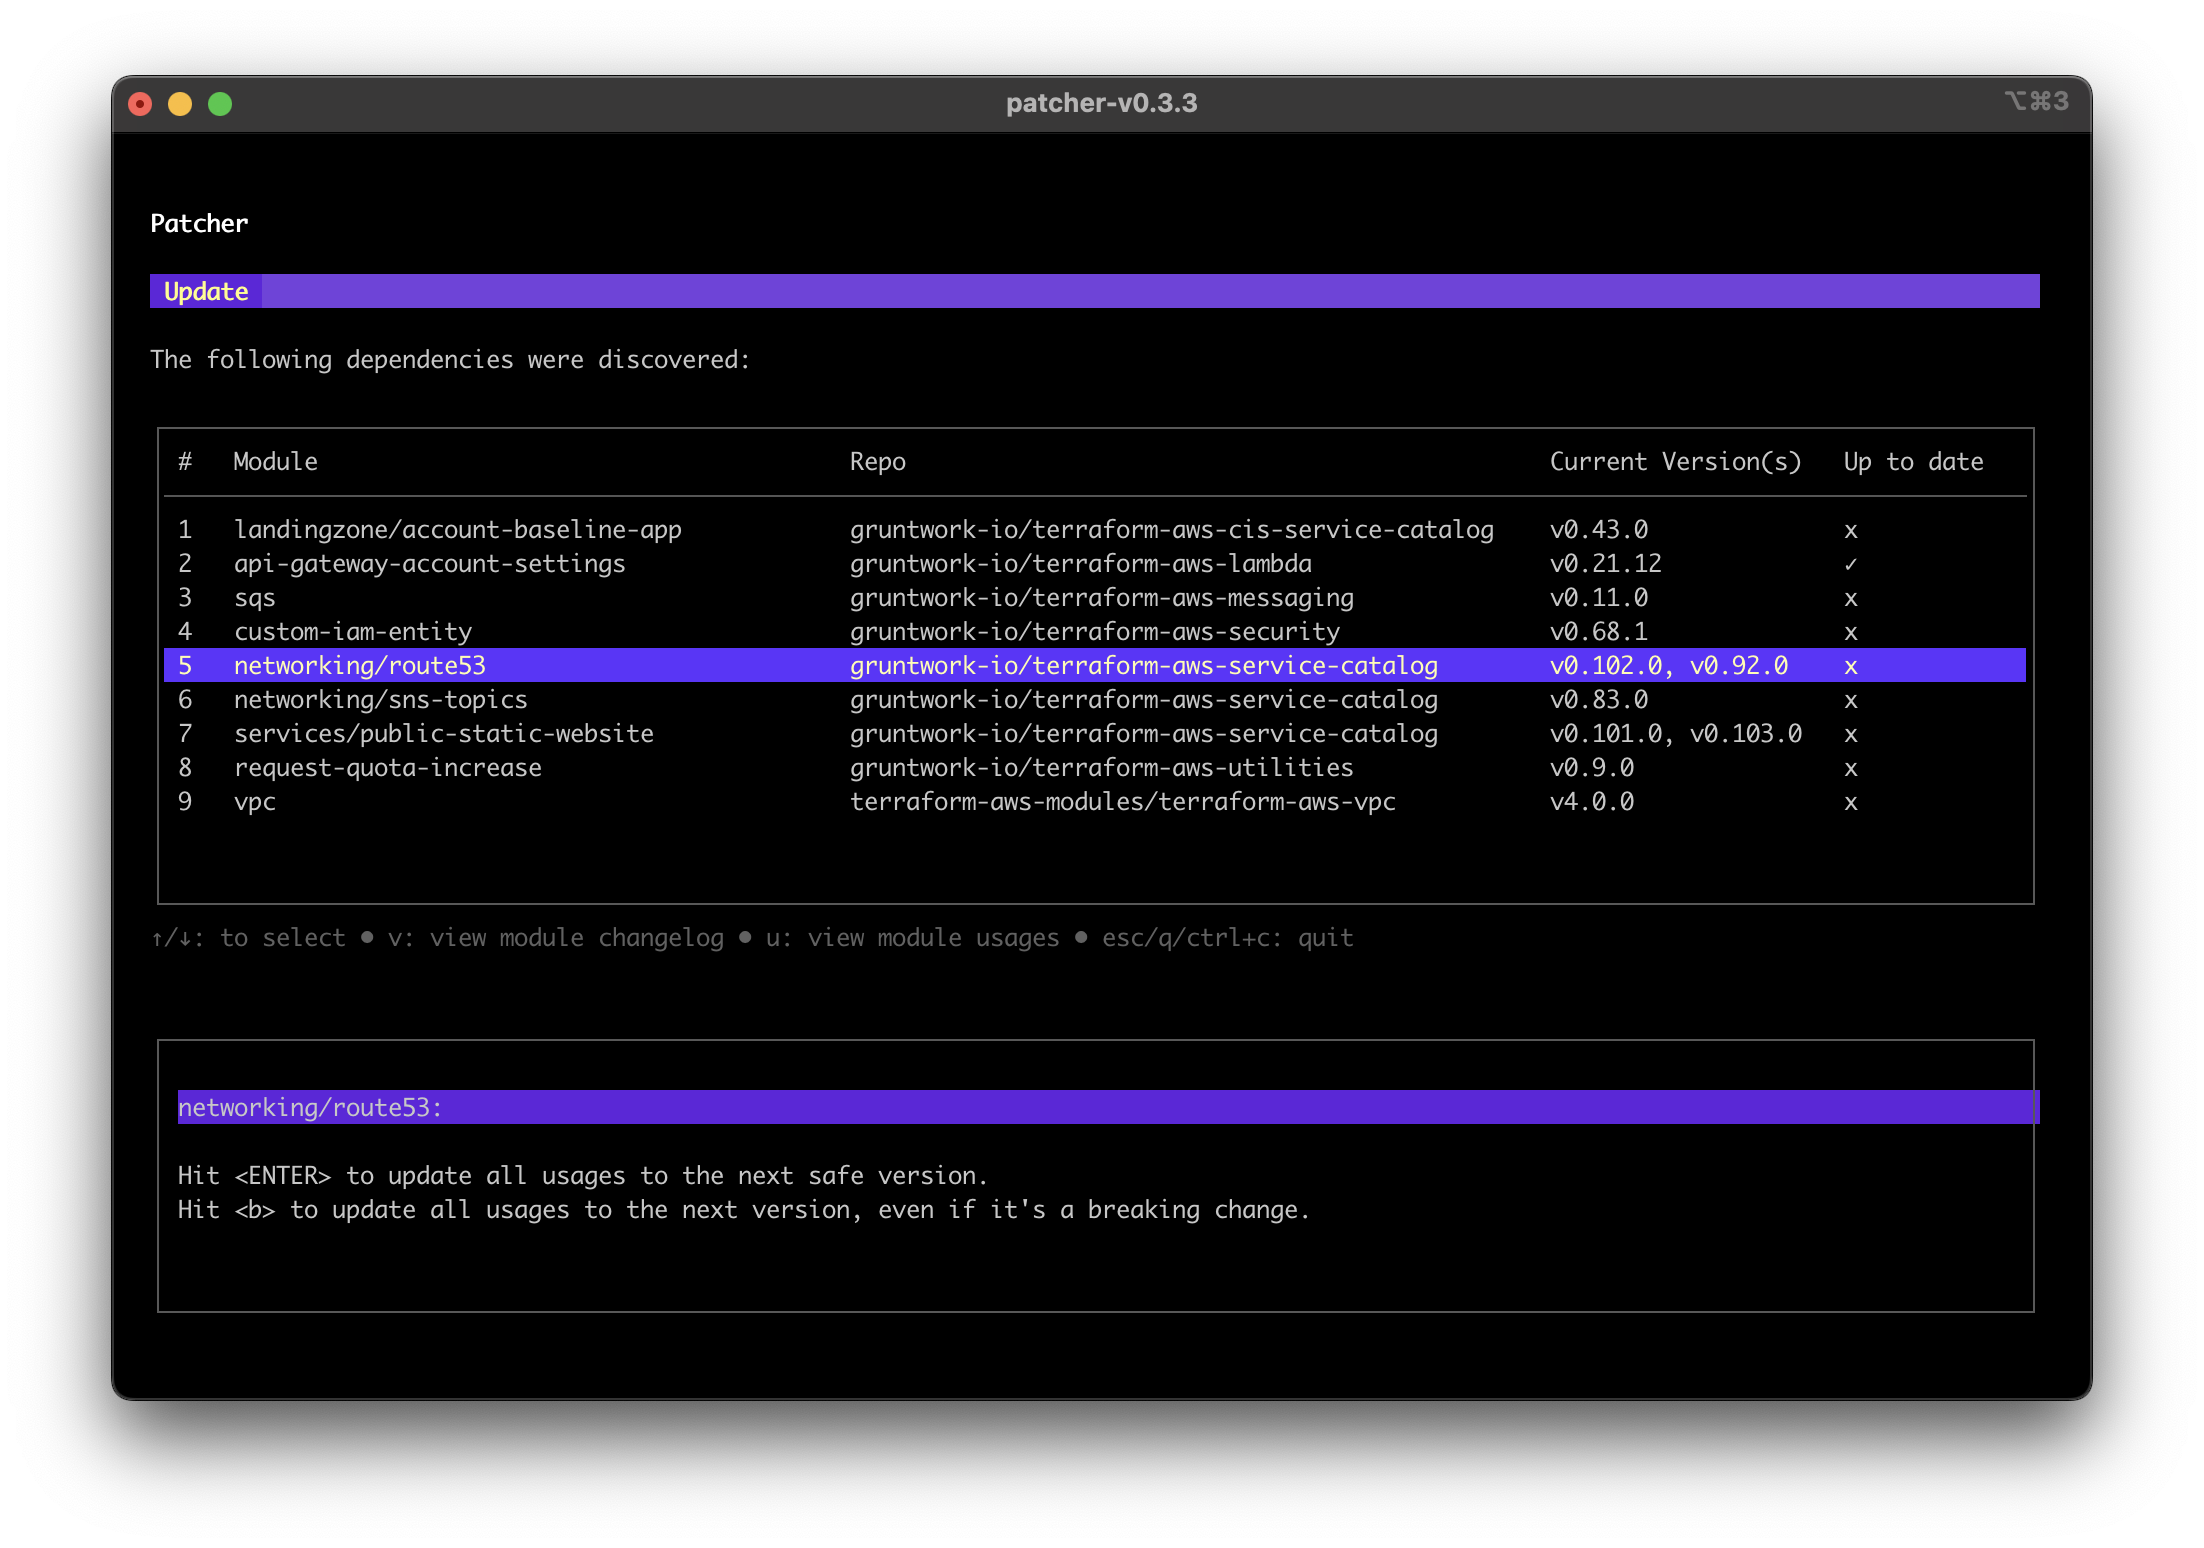 Patcher update screenshot showing dependency that can be updated